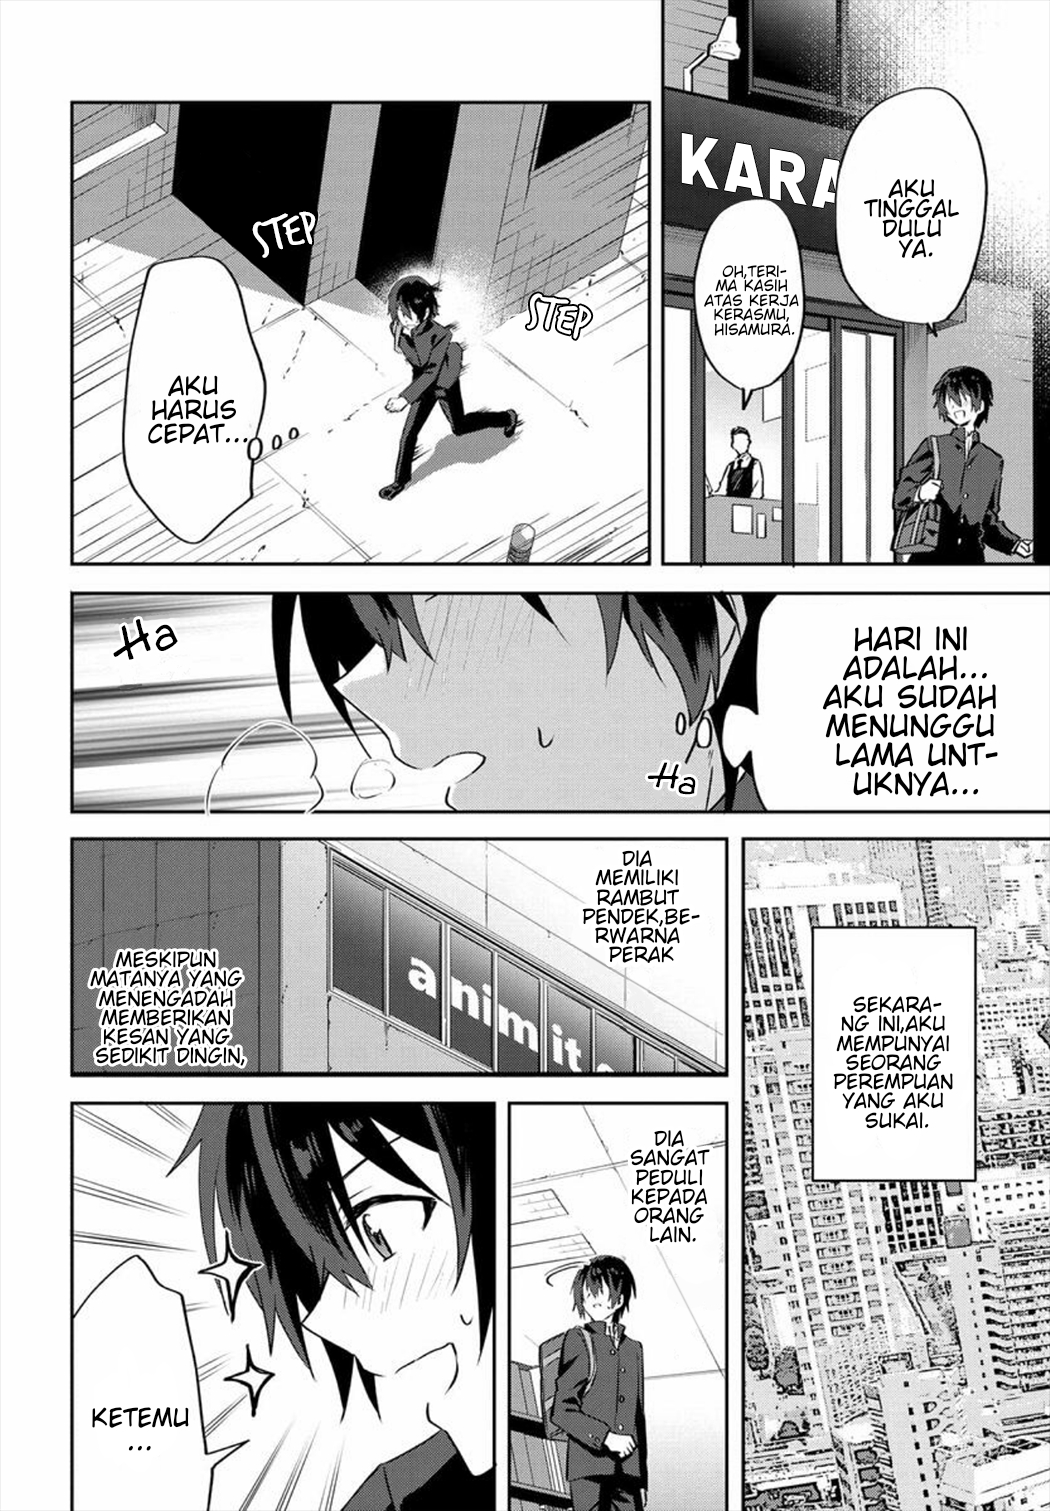 Since I'Ve Entered The World Of Romantic Comedy Manga, I'Ll Do My Best To Make The Losing Heroine Happy. Chapter 1 - 207